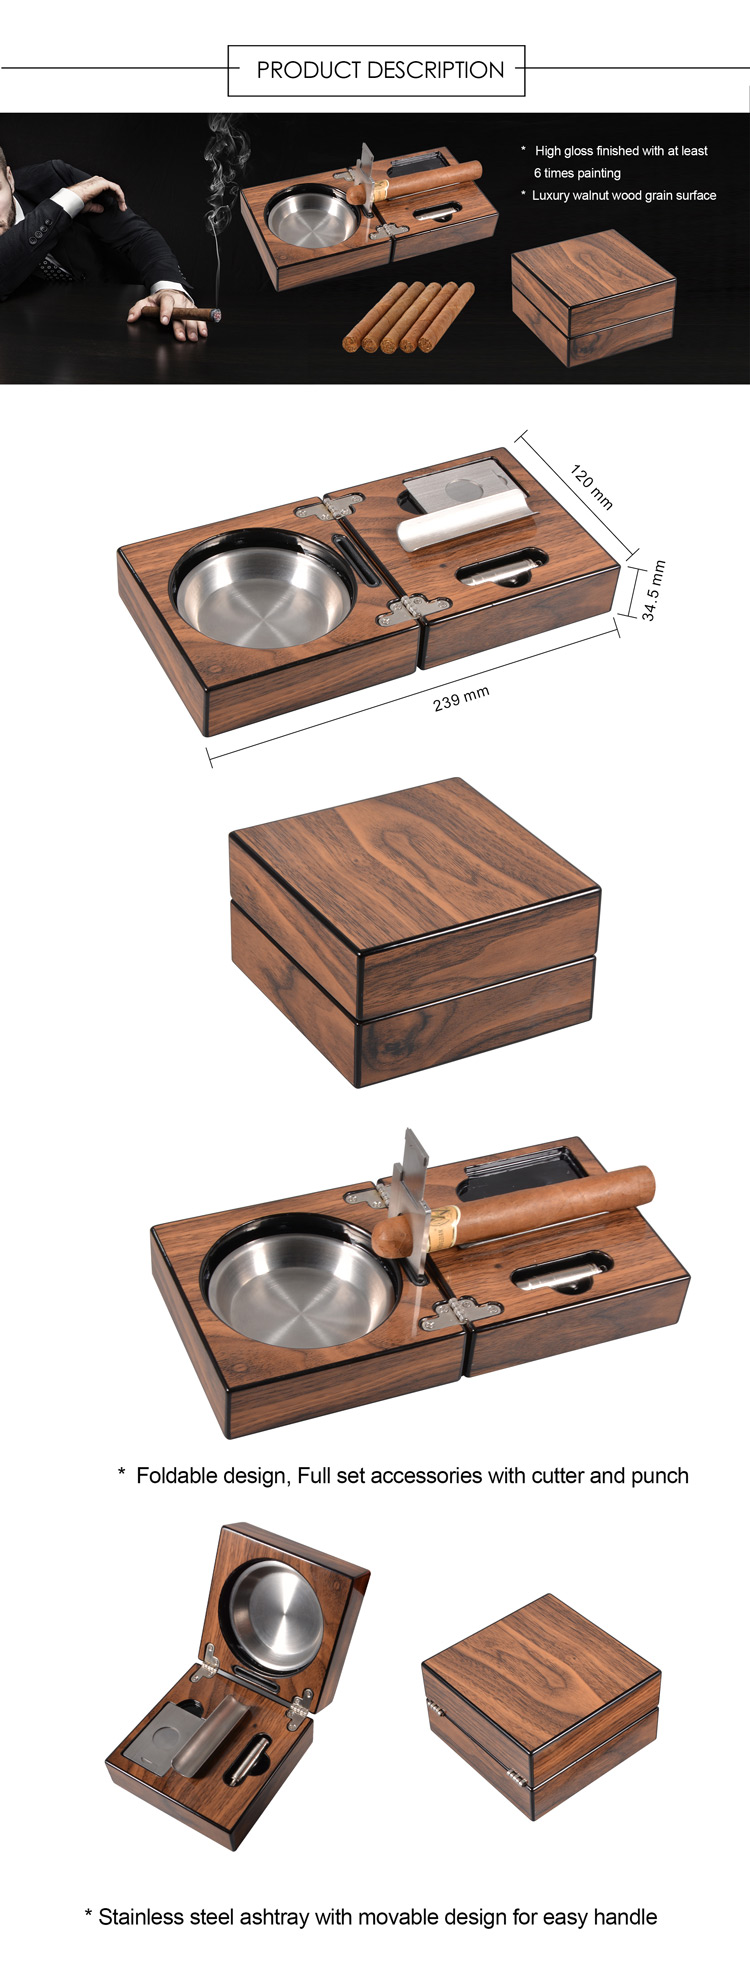 Top seller Foldable ashtray travel portable cigar ashtray with Cutter Set 3